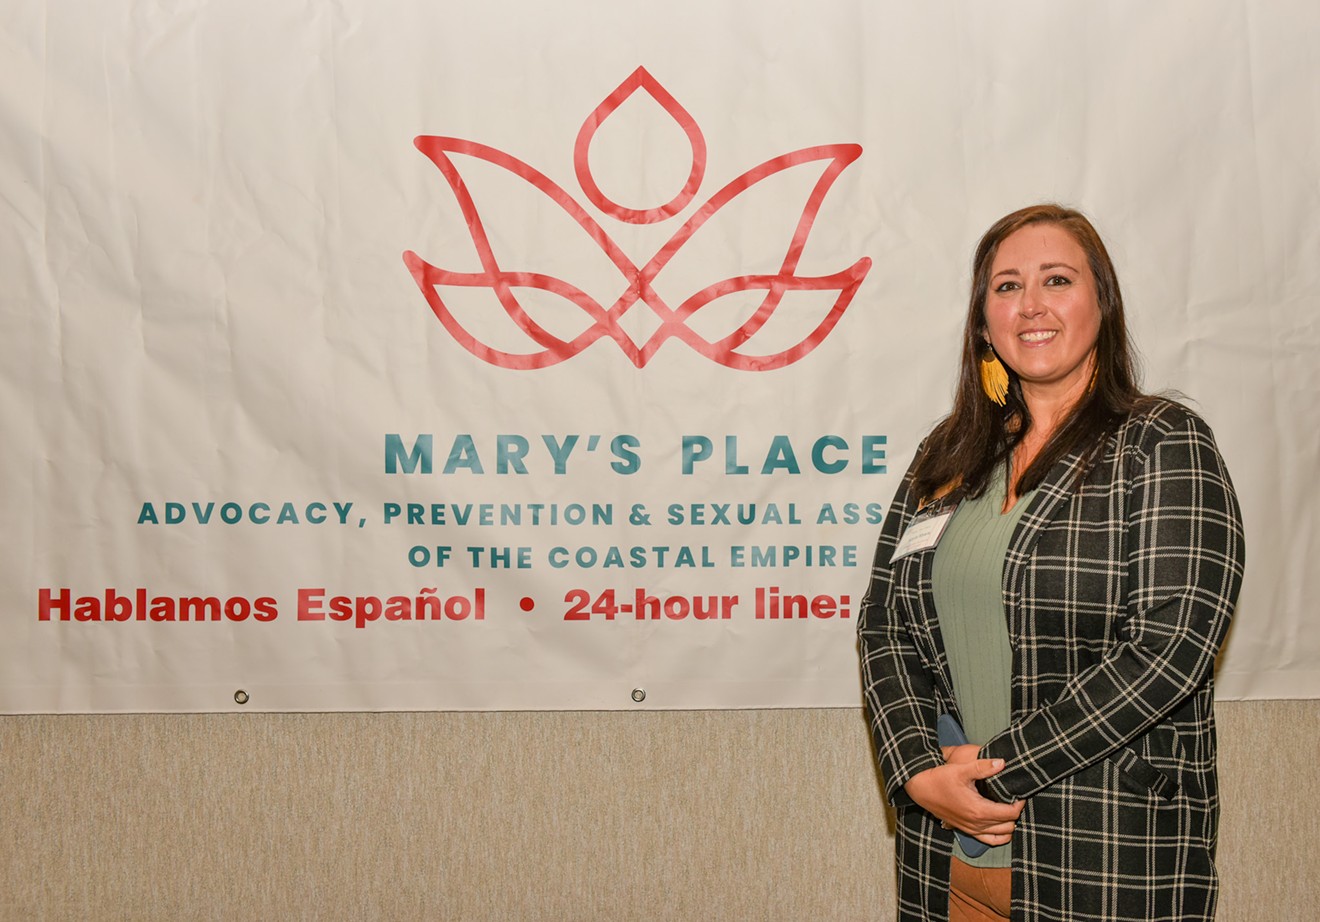 Mary’s Place Hosts A Responders Summit on Sexual Assault